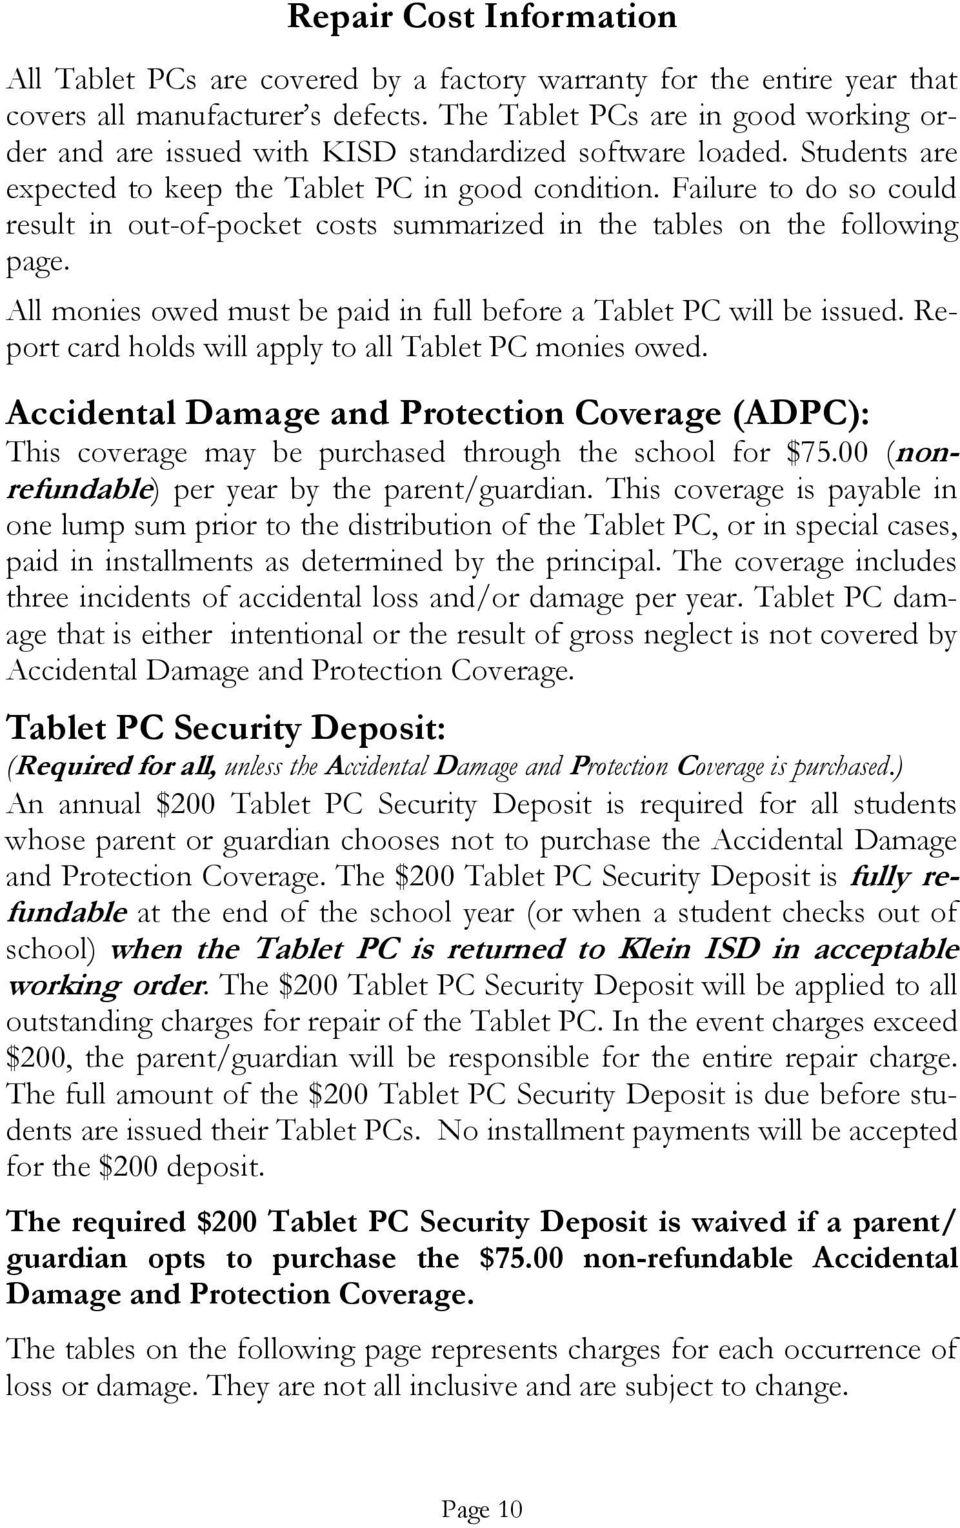 Failure to do so could result in out-of-pocket costs summarized in the tables on the following page. All monies owed must be paid in full before a Tablet PC will be issued.